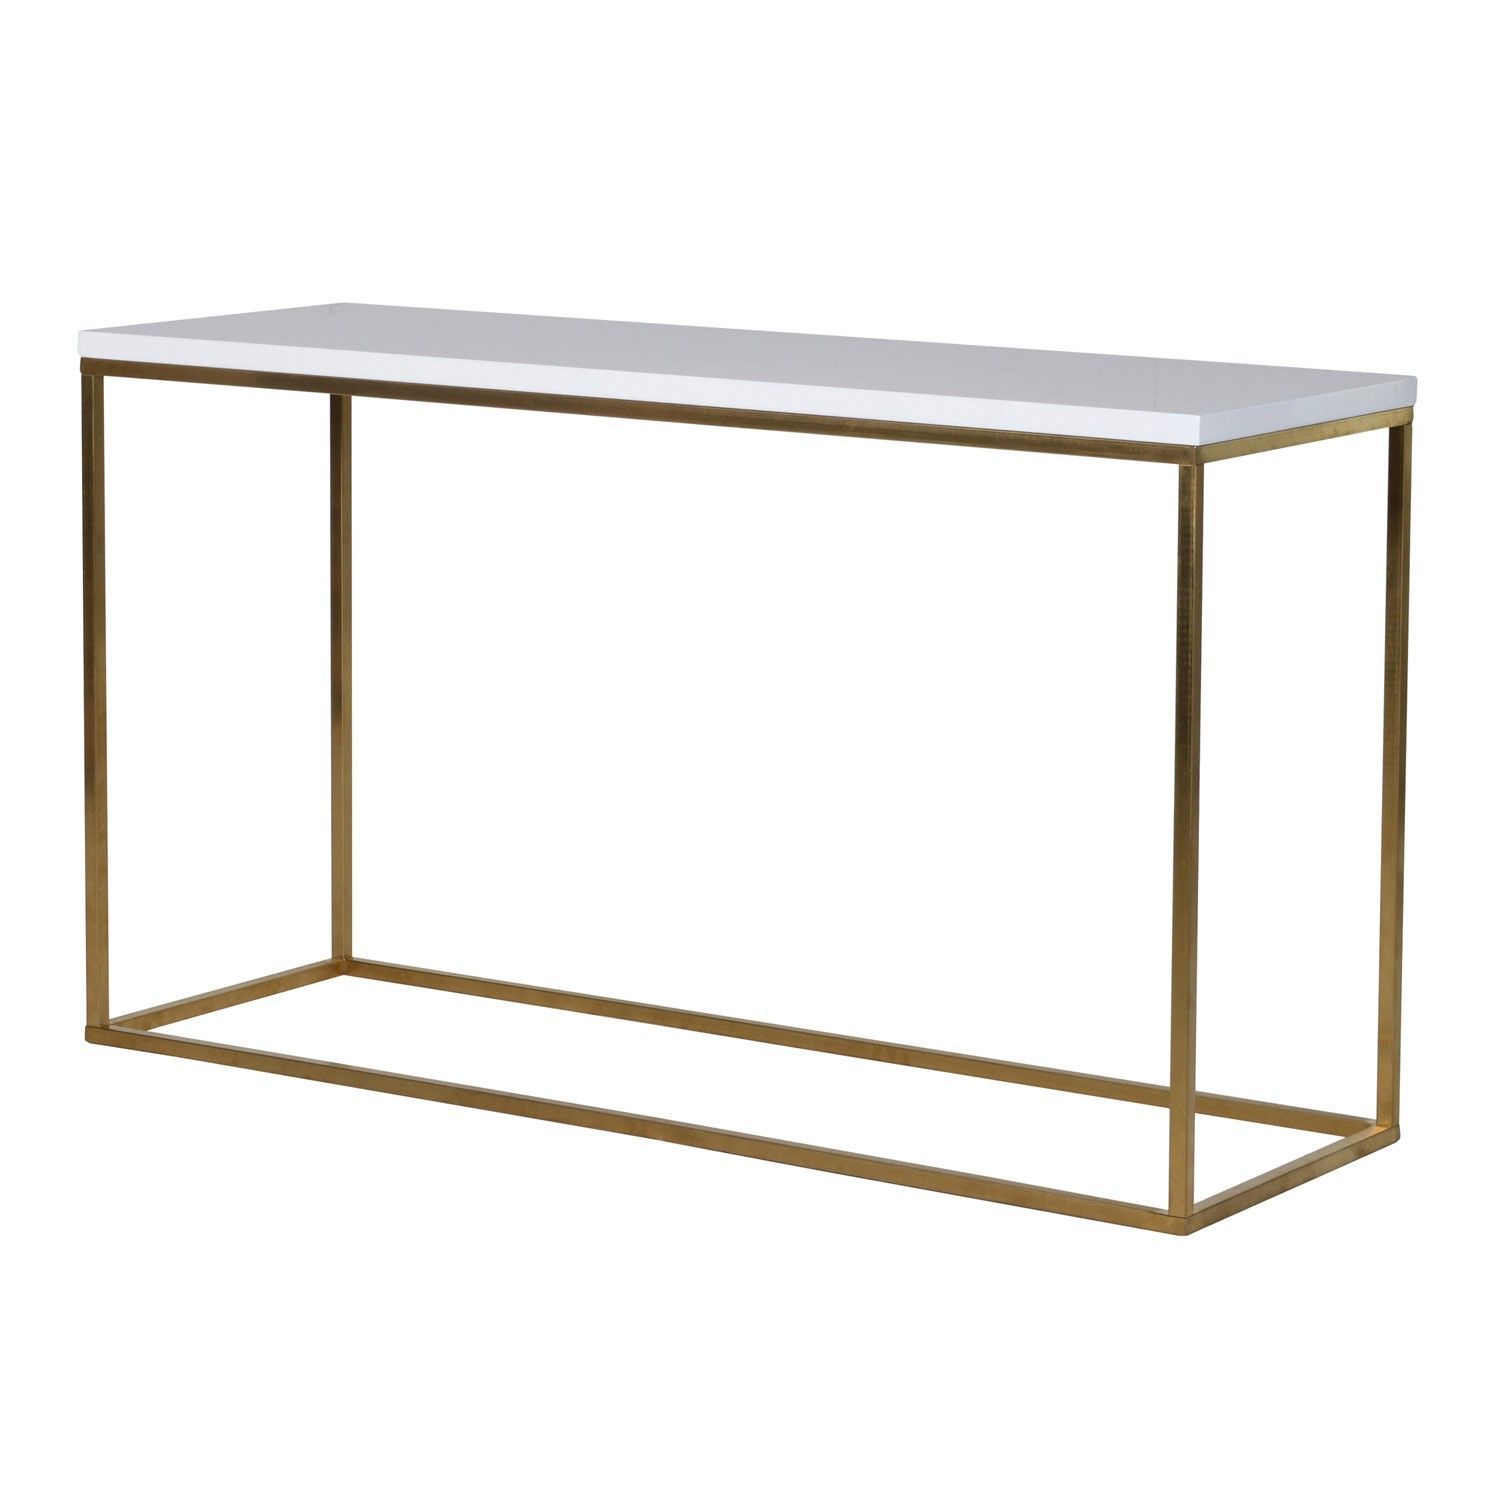 Glossy White Console Table | Sweetpea & Willow In White Gloss And Maple Cream Console Tables (Photo 14 of 20)